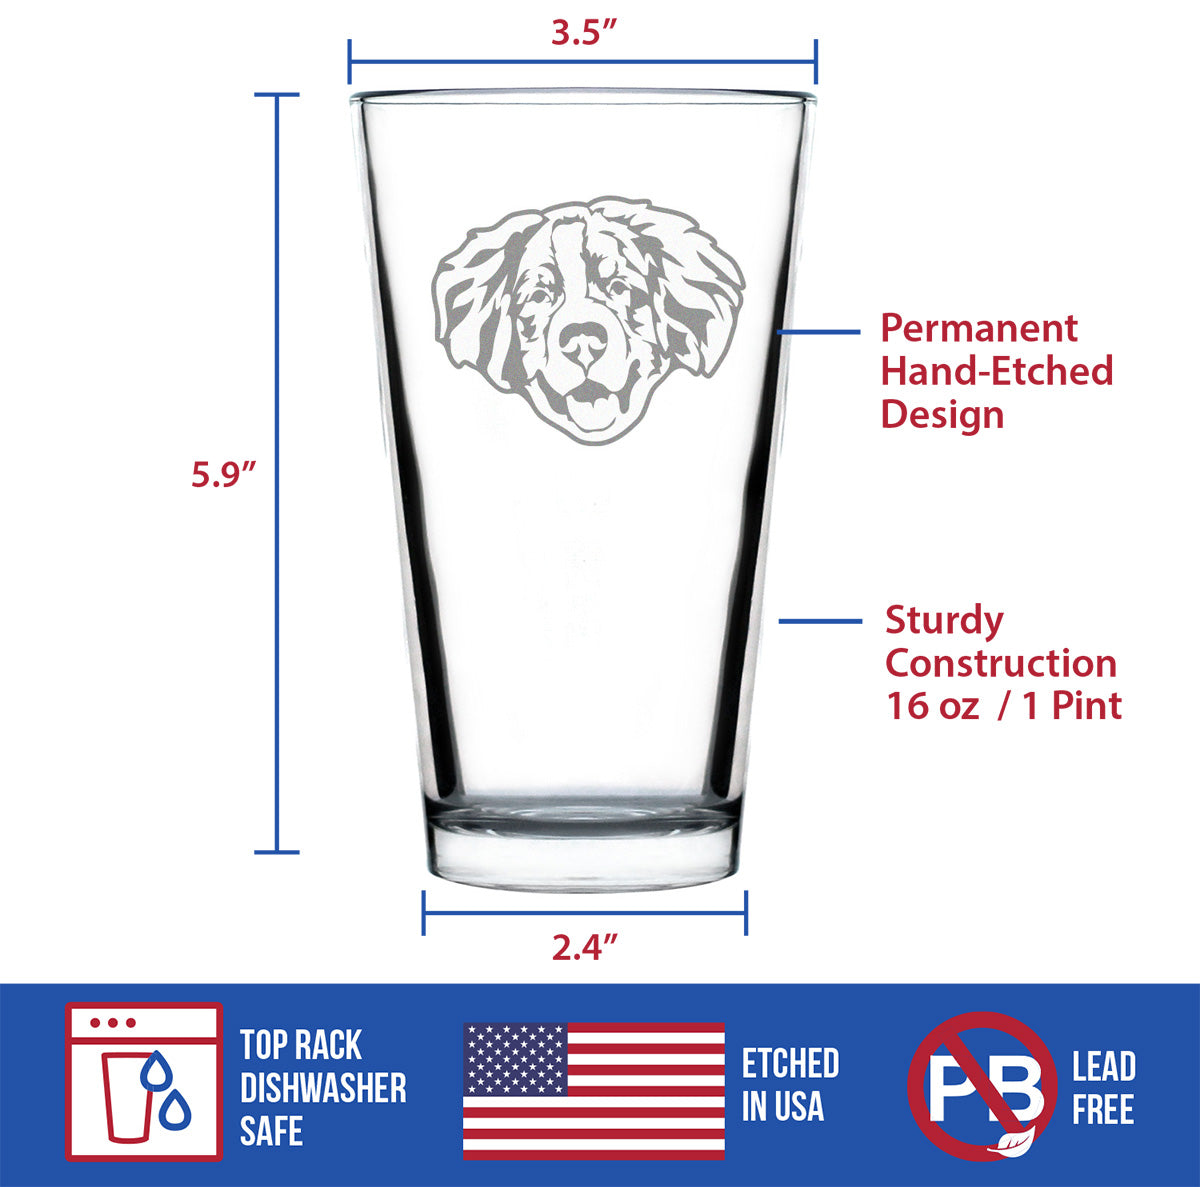 Bernese Mountain Dog Face Pint Glass for Beer - Unique Dog Themed Decor and Gifts for Moms &amp; Dads of Berneses - 16 Oz